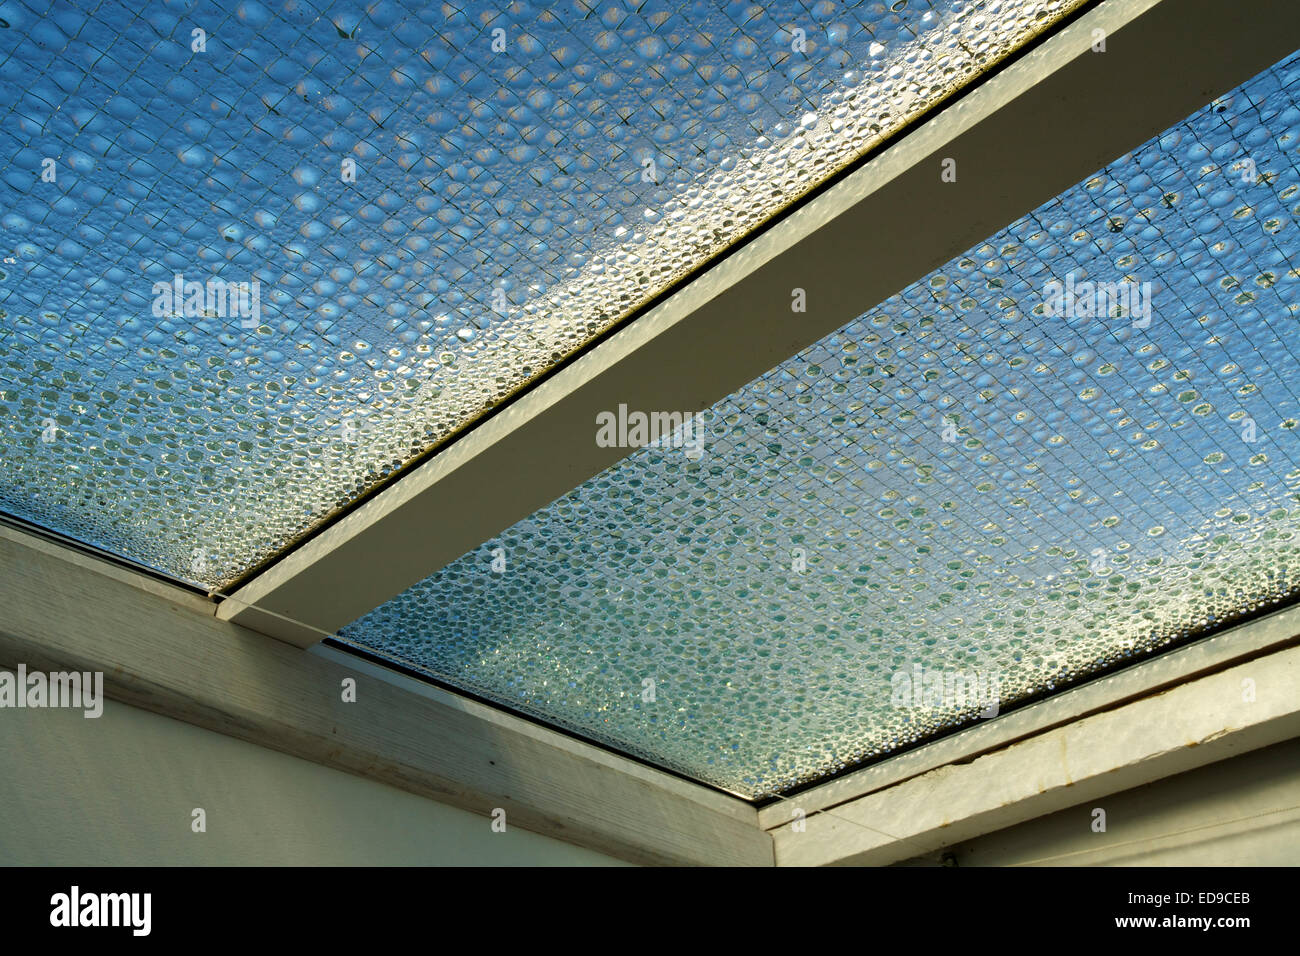 Condensation droplets on underside of single-glazed glass roof Stock Photo